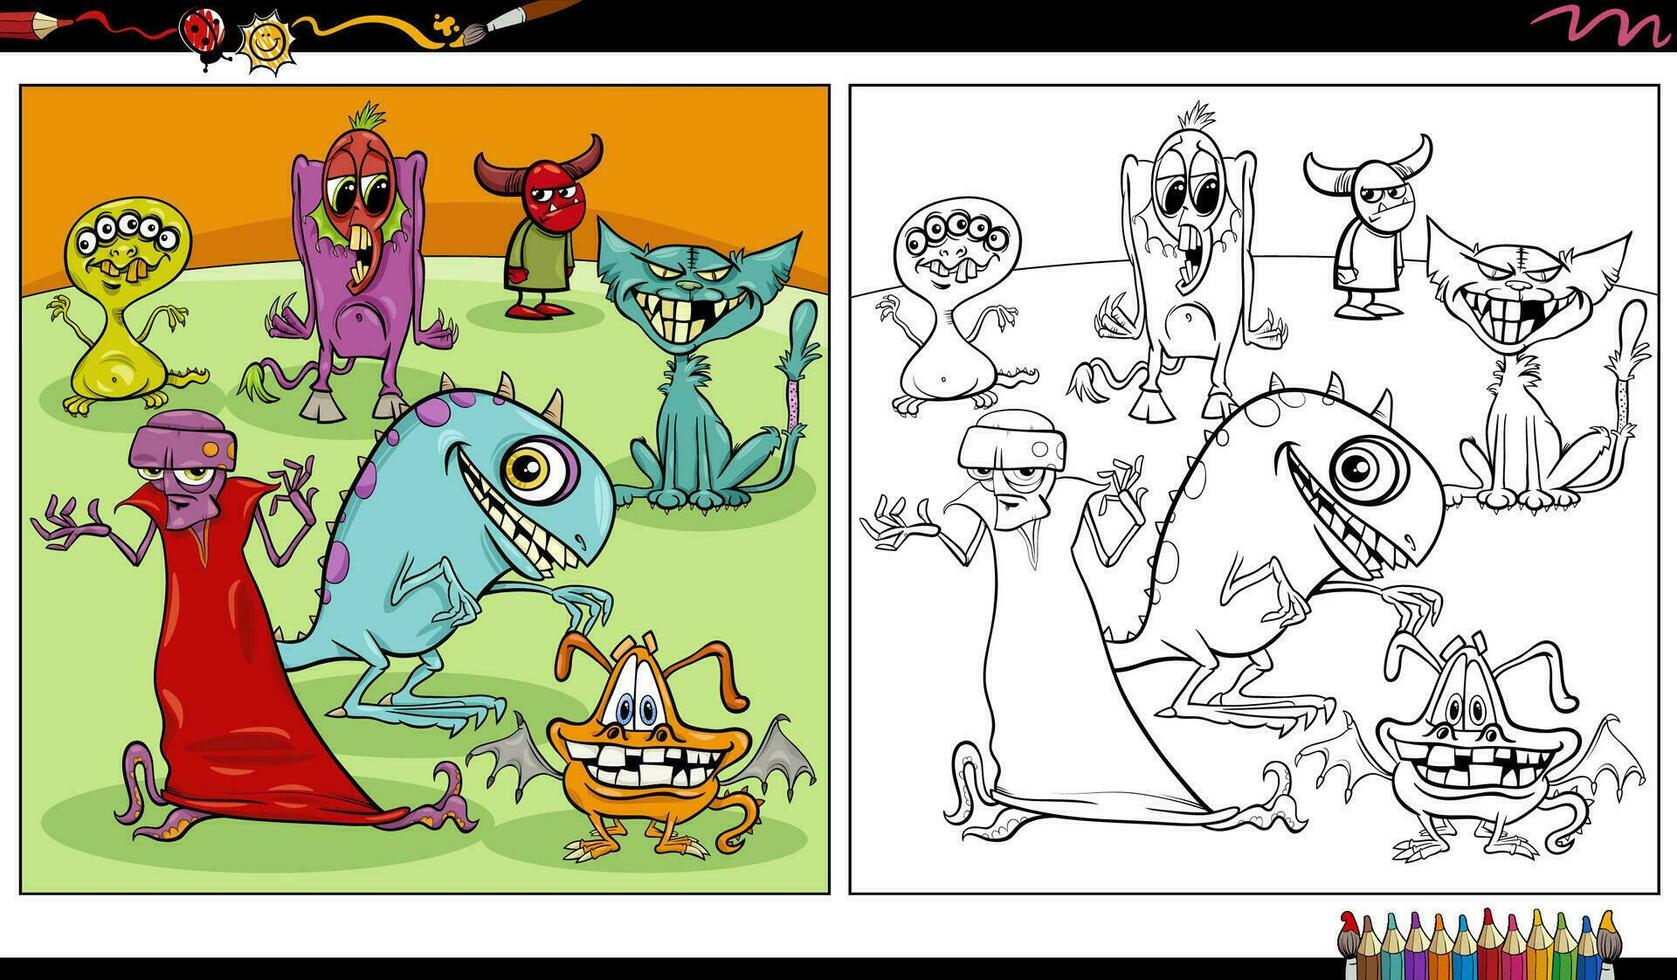 funny comic monsters or aliens characters group coloring page vector